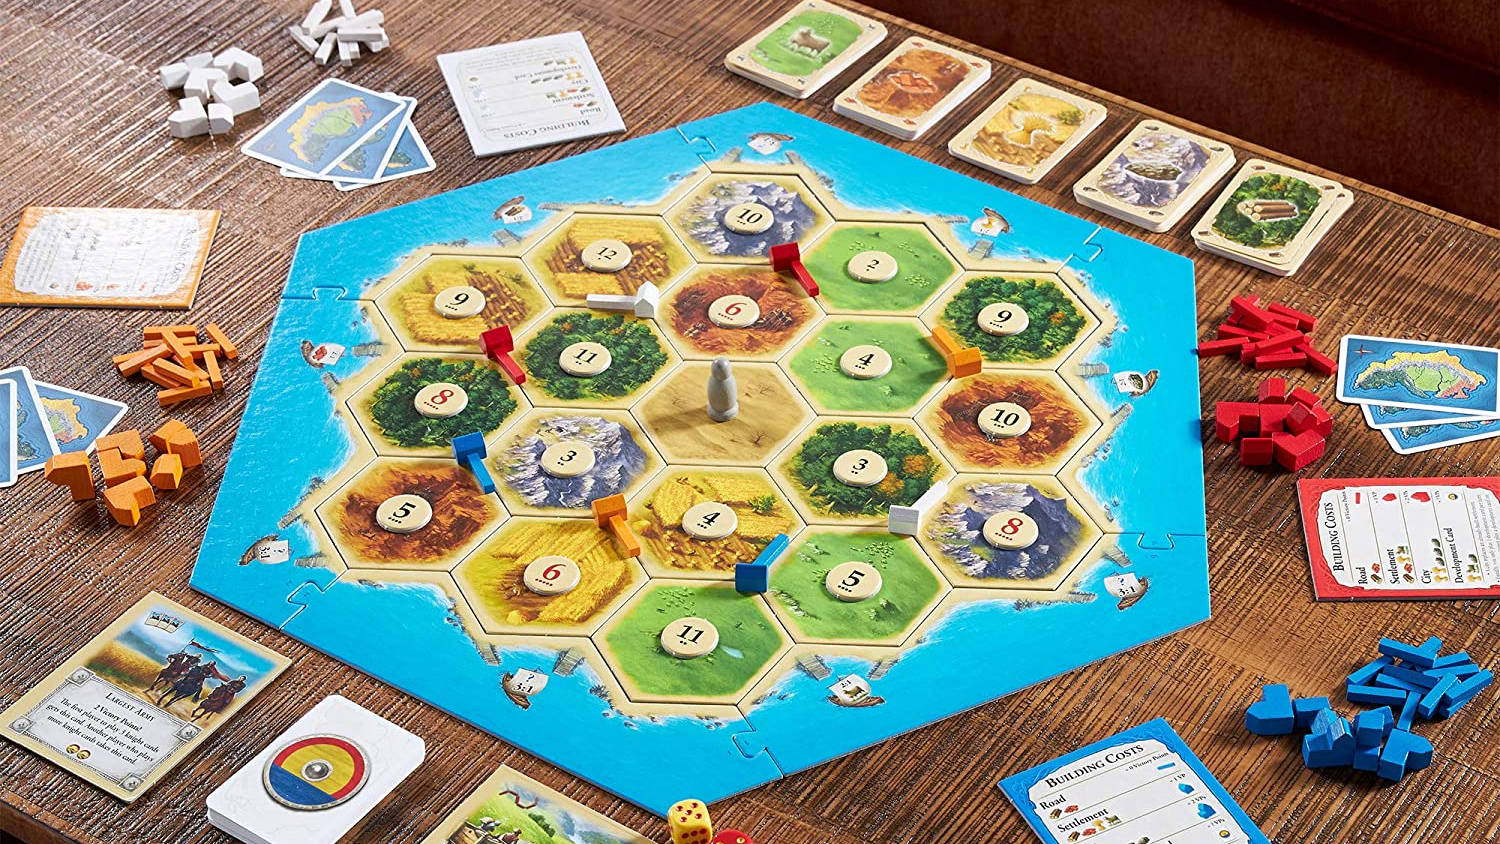 Fun board games Catan board set up on a table, ready to play